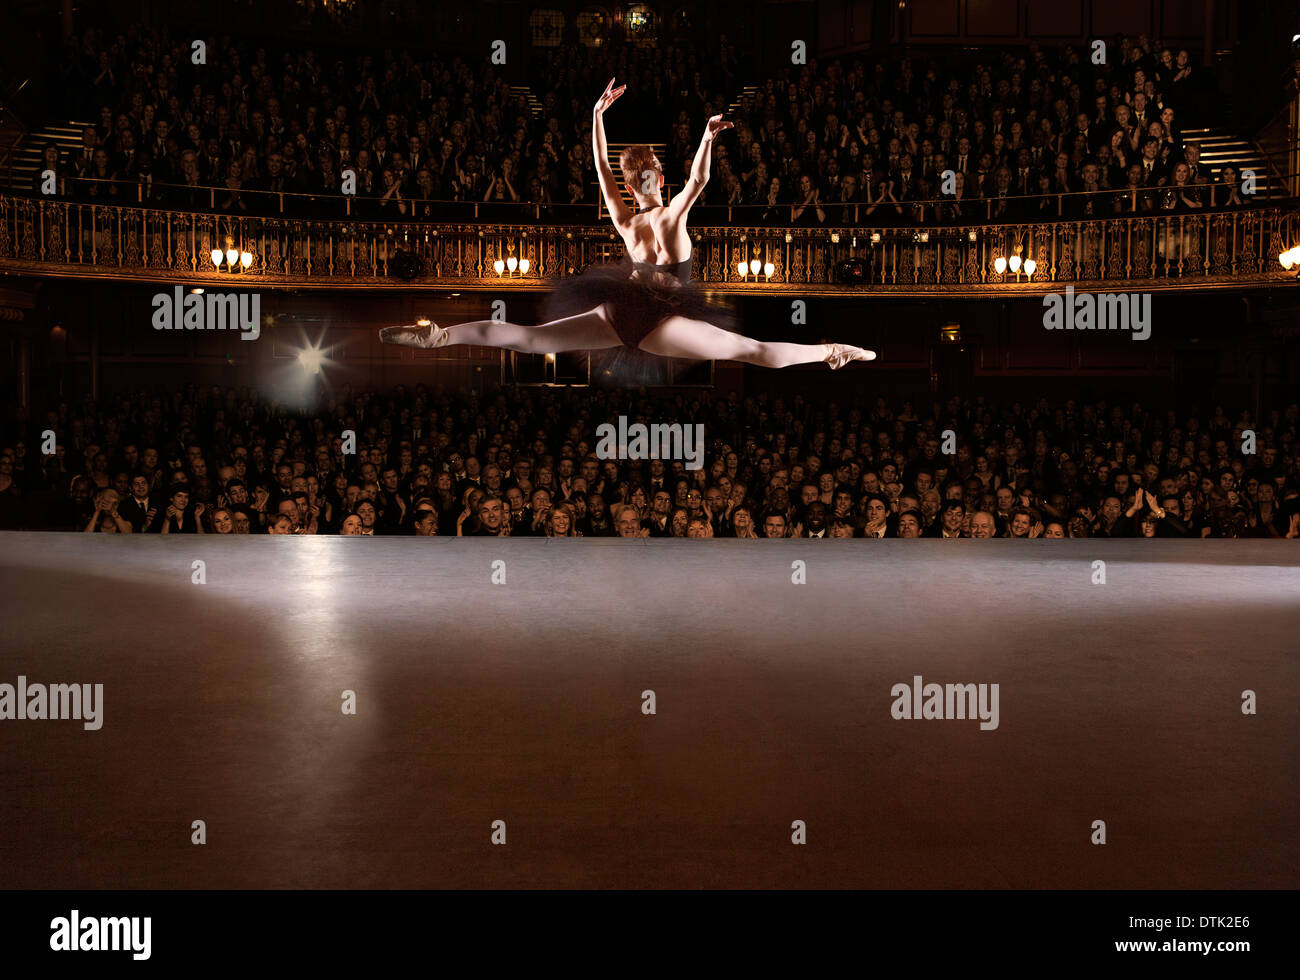 Ballet dancer performing on theater stage Stock Photo